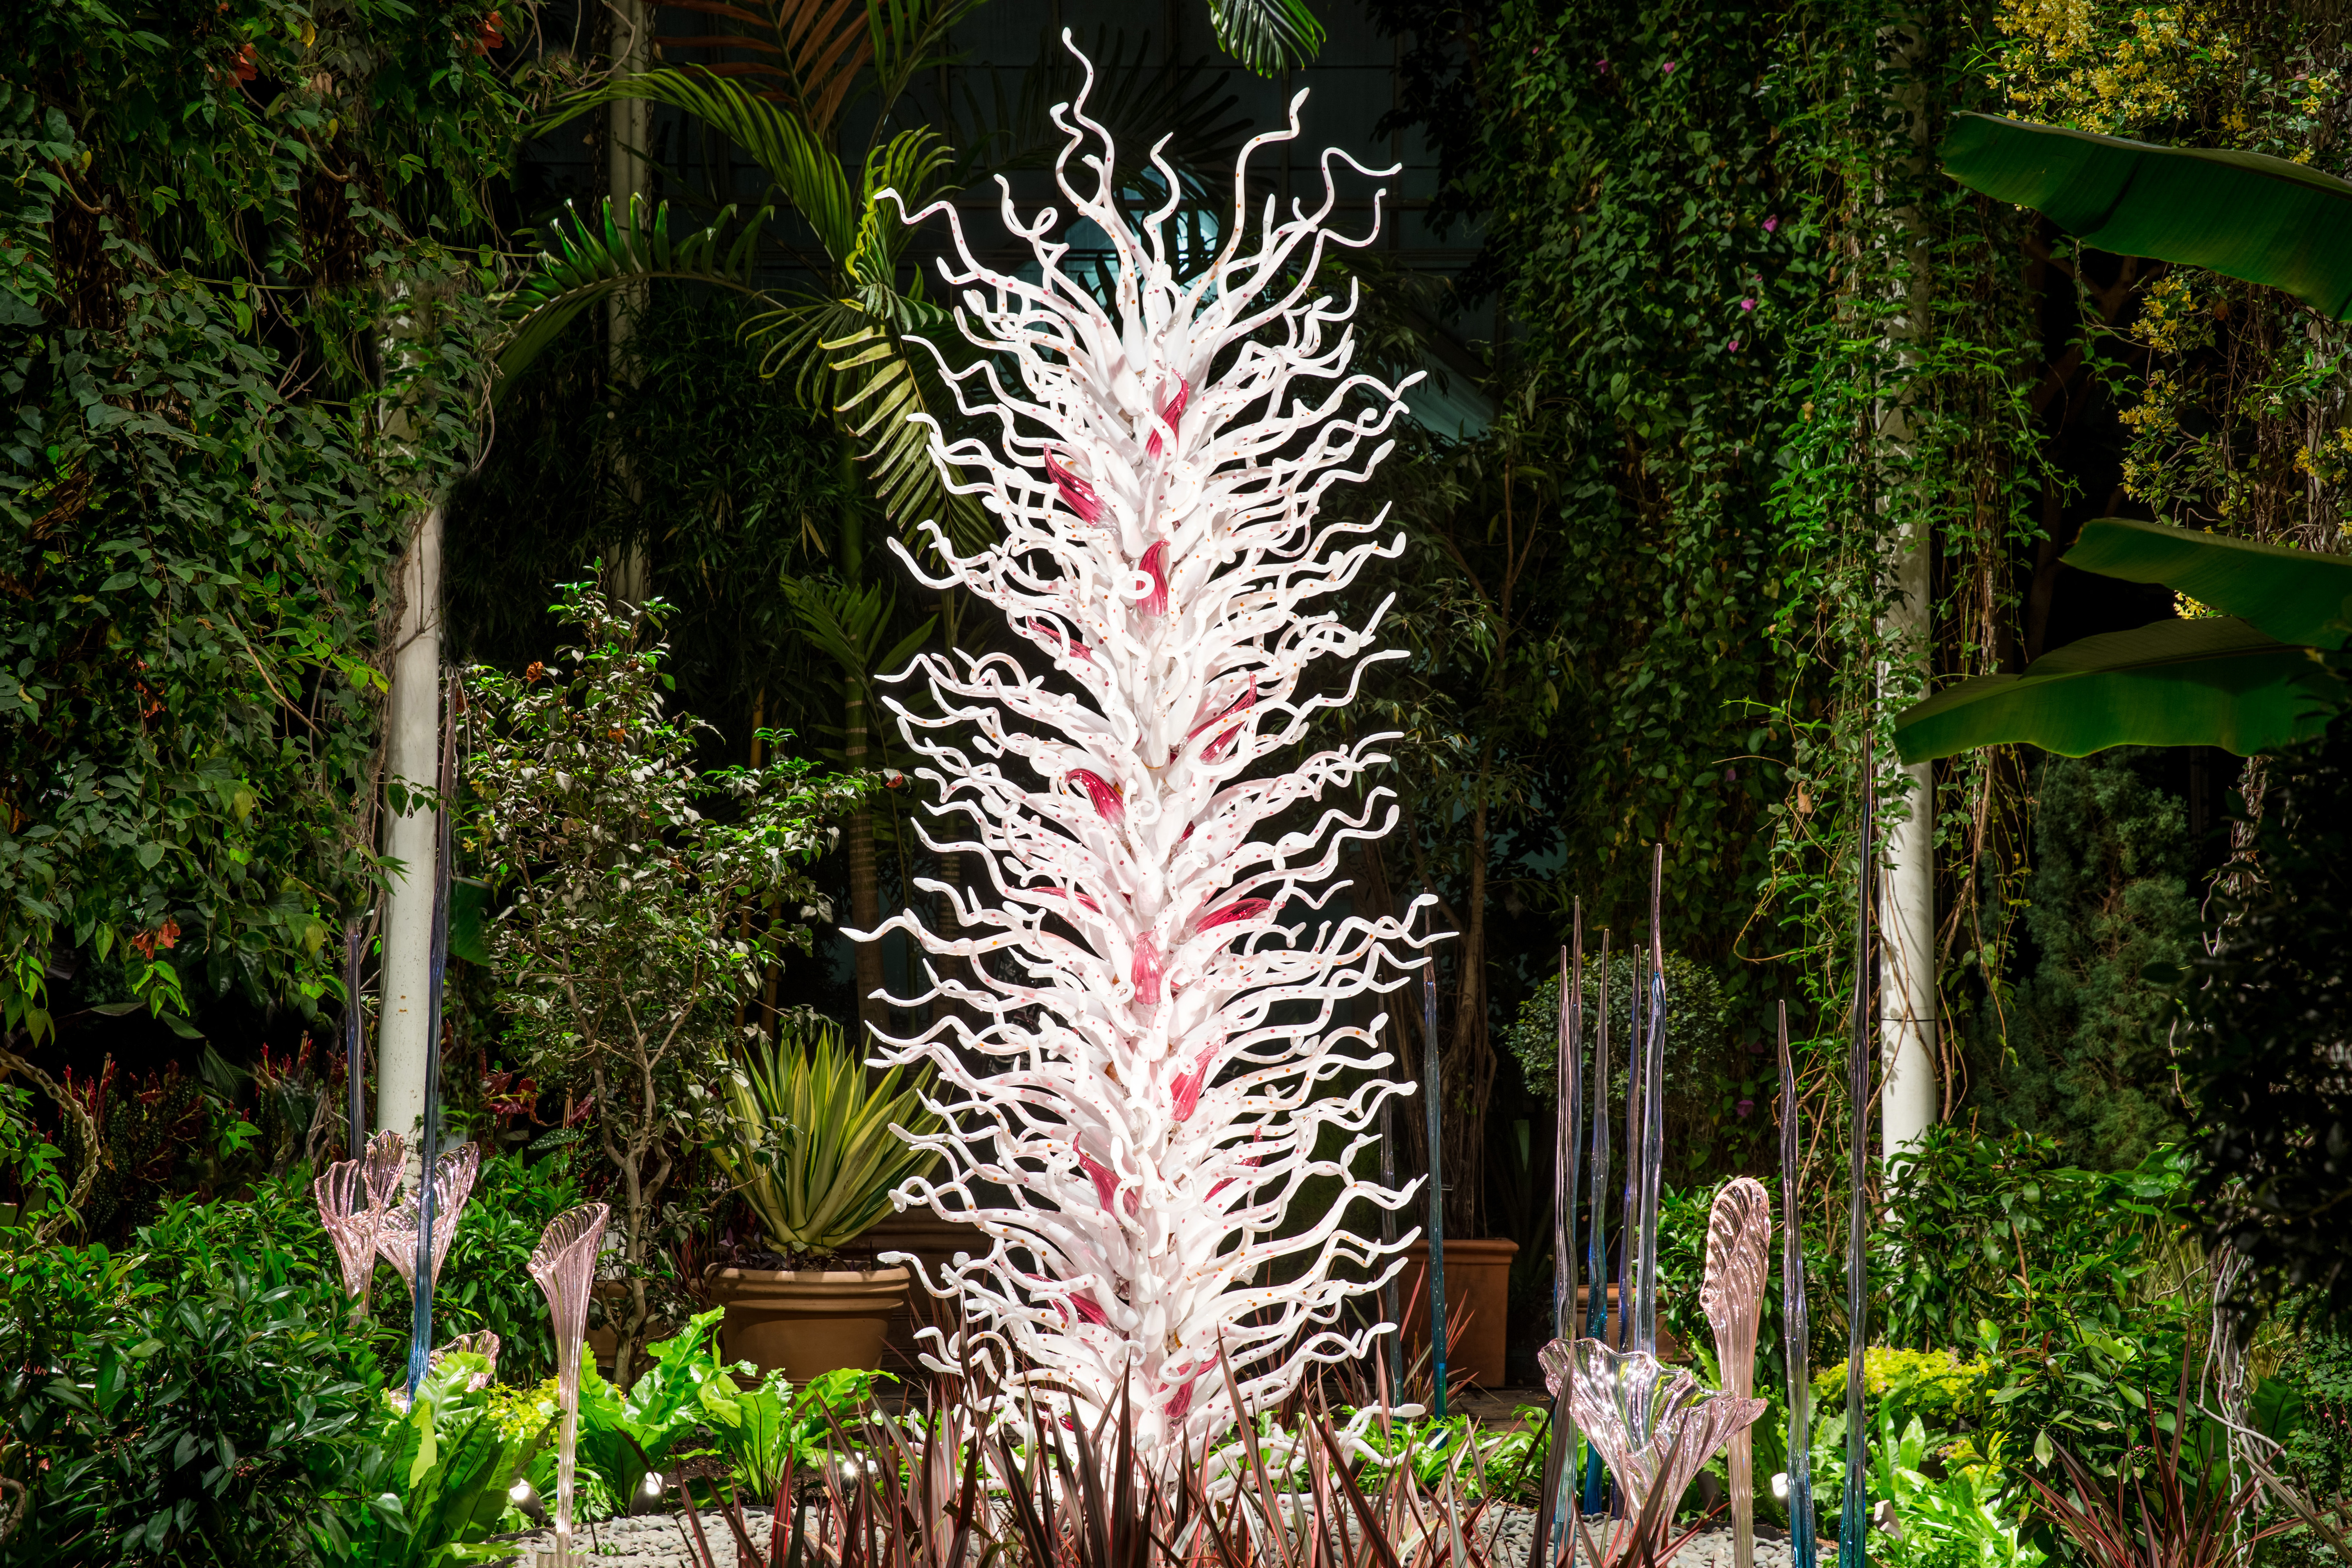 NYBG CHIHULY 10 White Tower with Fiori 2017